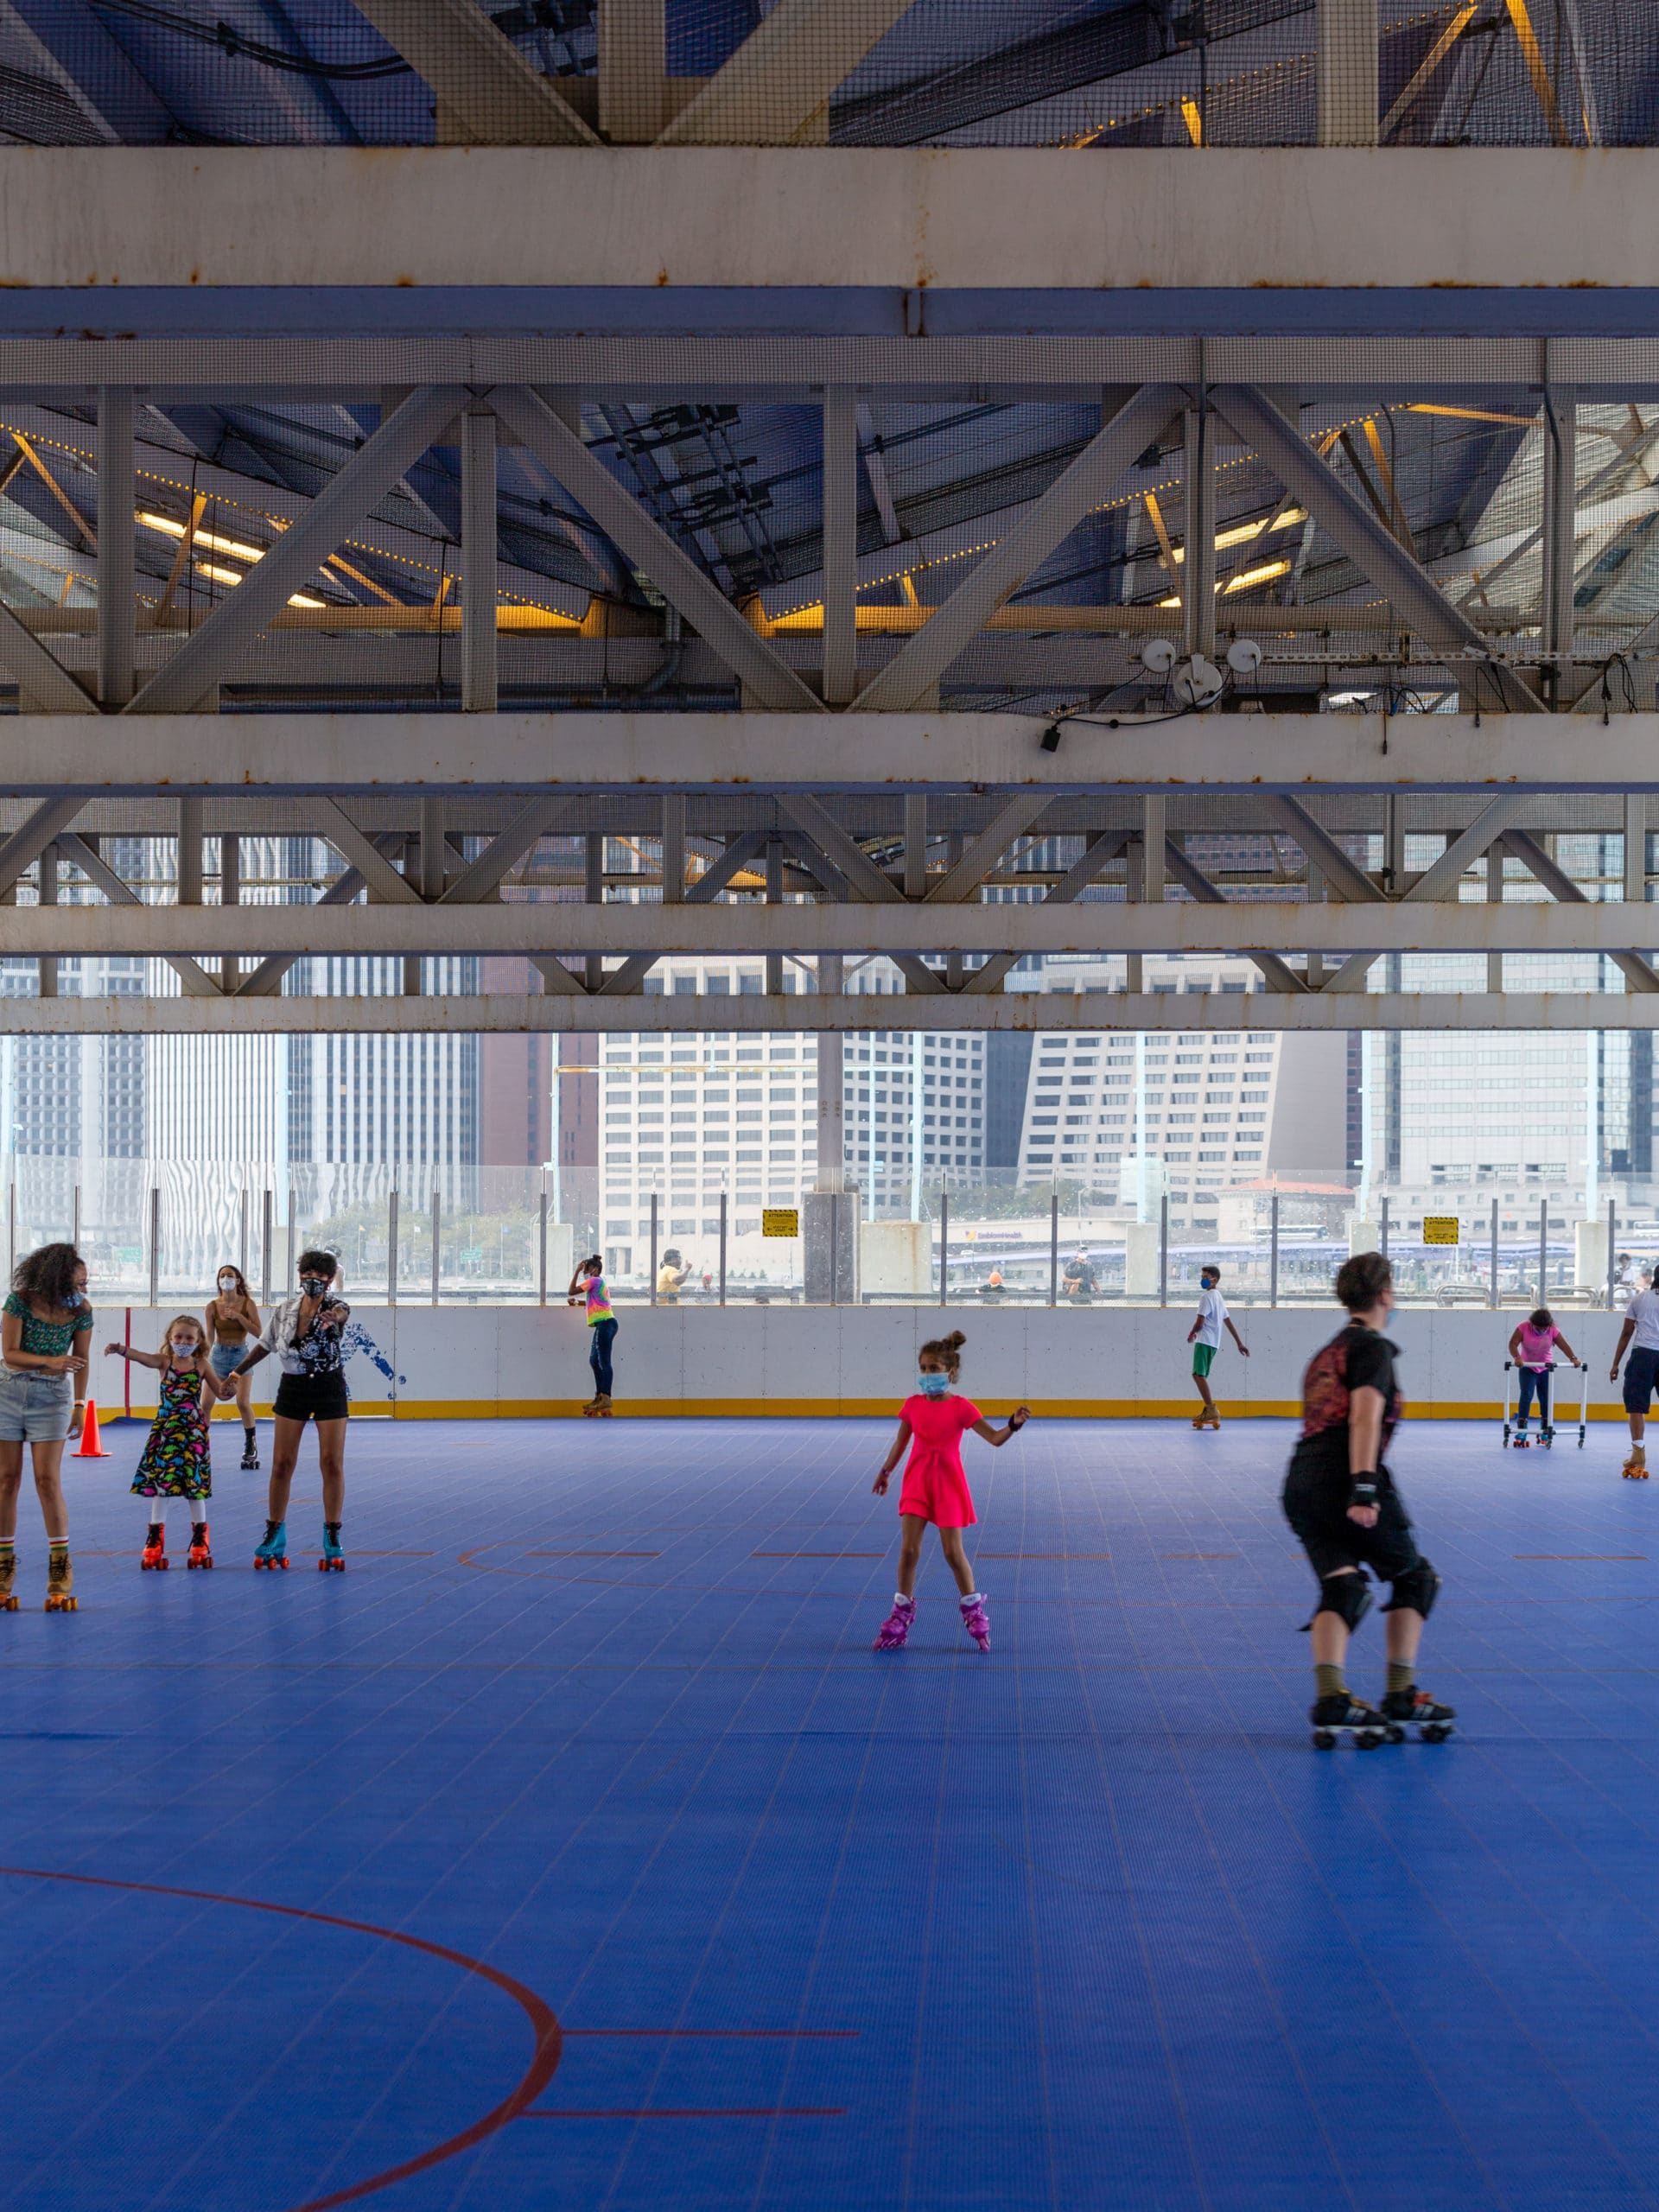 People skating at the rink under the roof at Pier 2.